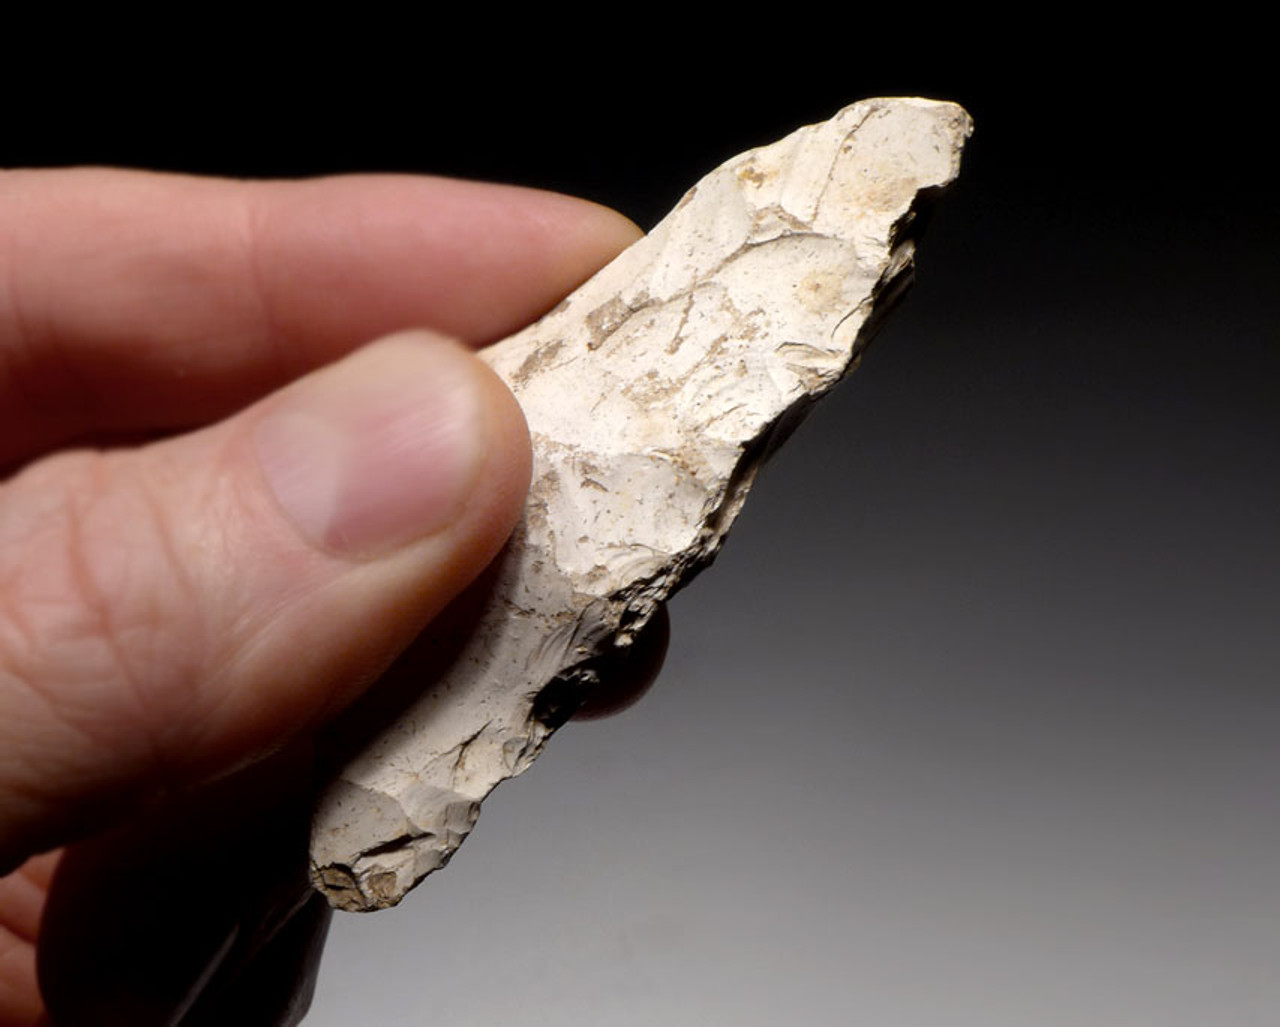 N156 - RARE OPPORTUNITY NEOLITHIC FLINT TOOL FROM AVEBURY THE LARGEST ANCIENT HENGE MONUMENT IN EUROPE WITH FAMOUS PROVENANCE